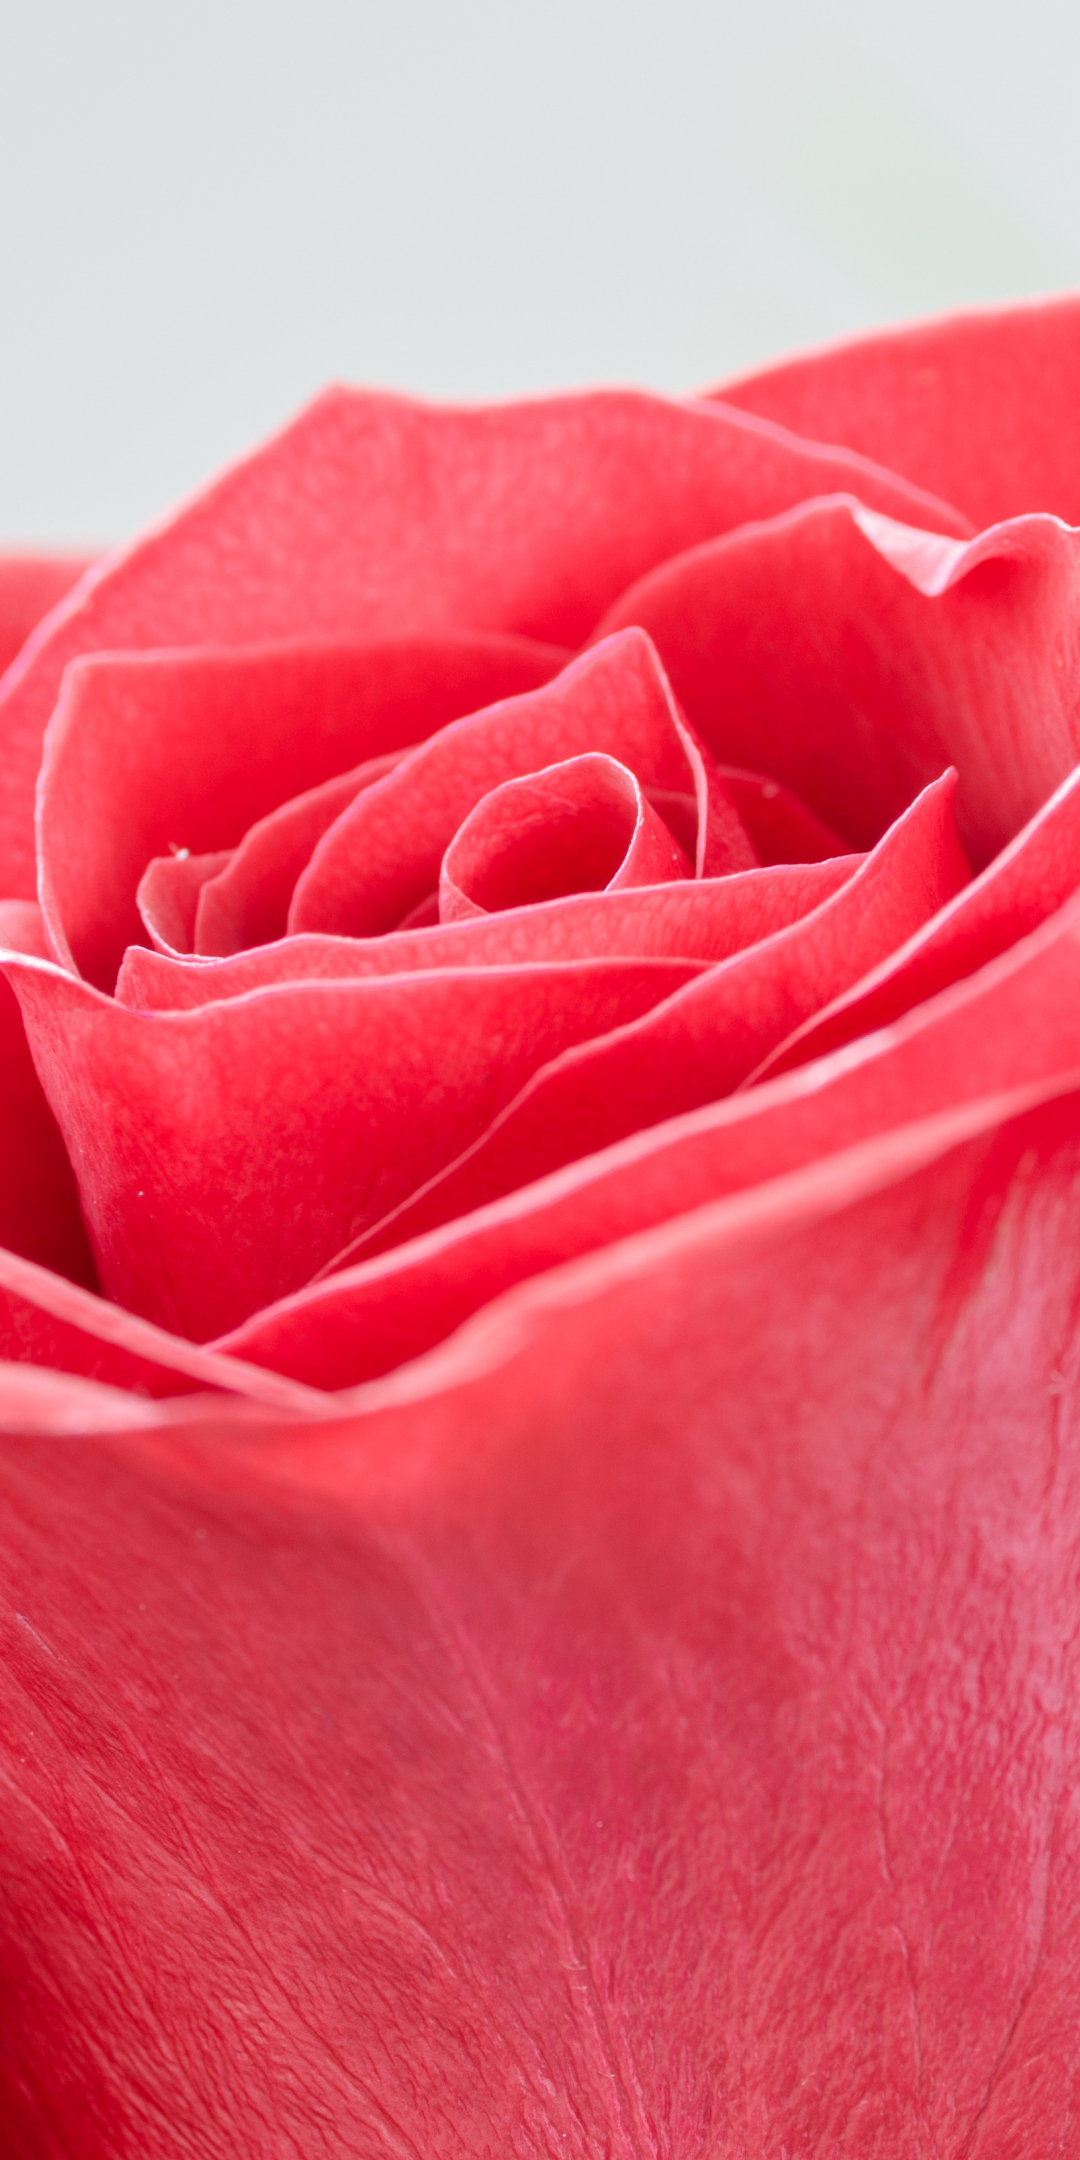 Red rose, flower, close up, bud, 1080x2160 wallpaper